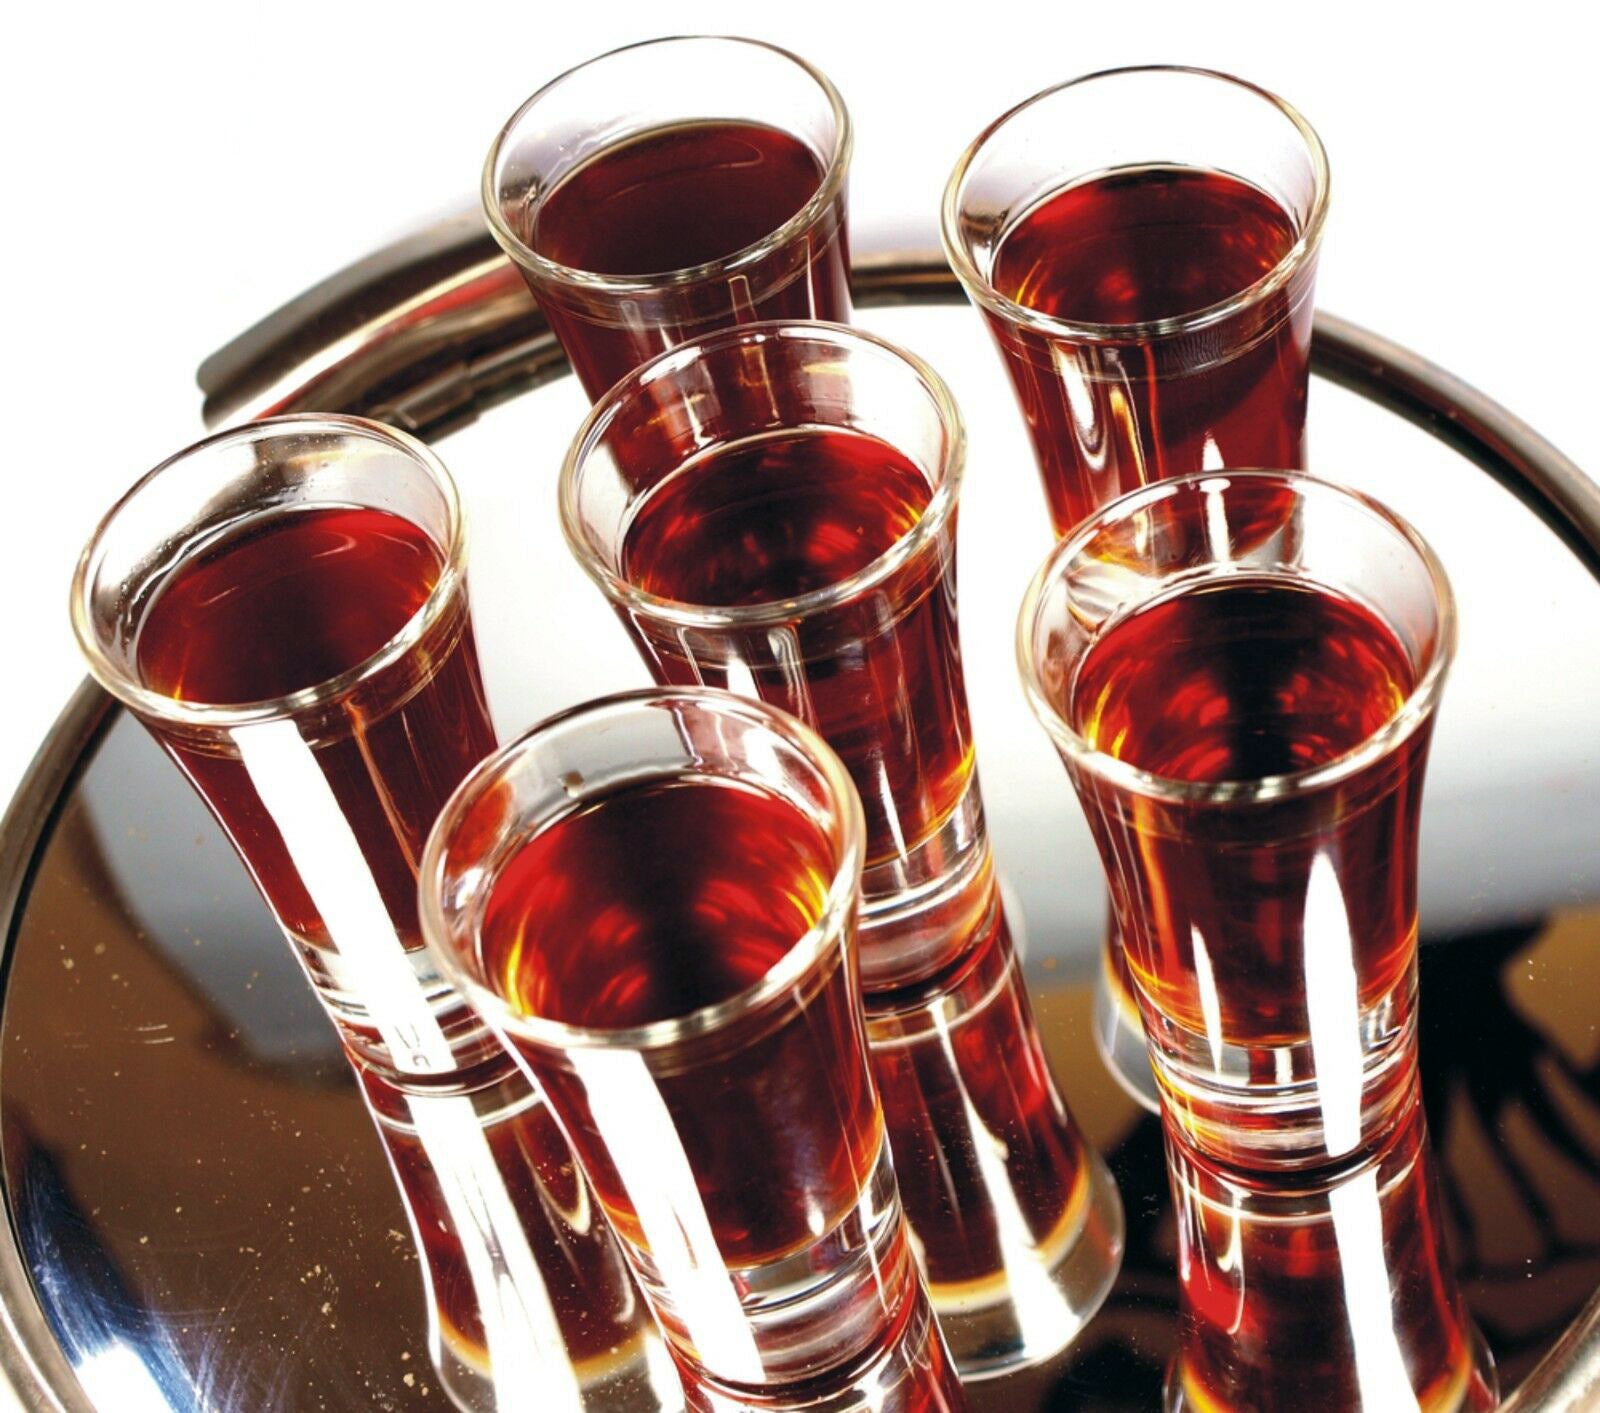 10 x Clear Shot Glasses Heavy Duty Strong Reusable Plastic 25ml CE Marked, Stackable. Bars, Pubs, BBQs, Jelly Shots, Liquor, Spirits-5056020186861-EY-PP-163-Product Pro-25ml, Clear Shot Glasses, Plastic Shot Glasses, Reusable Shot Glasses, Shot Glasses, Shots